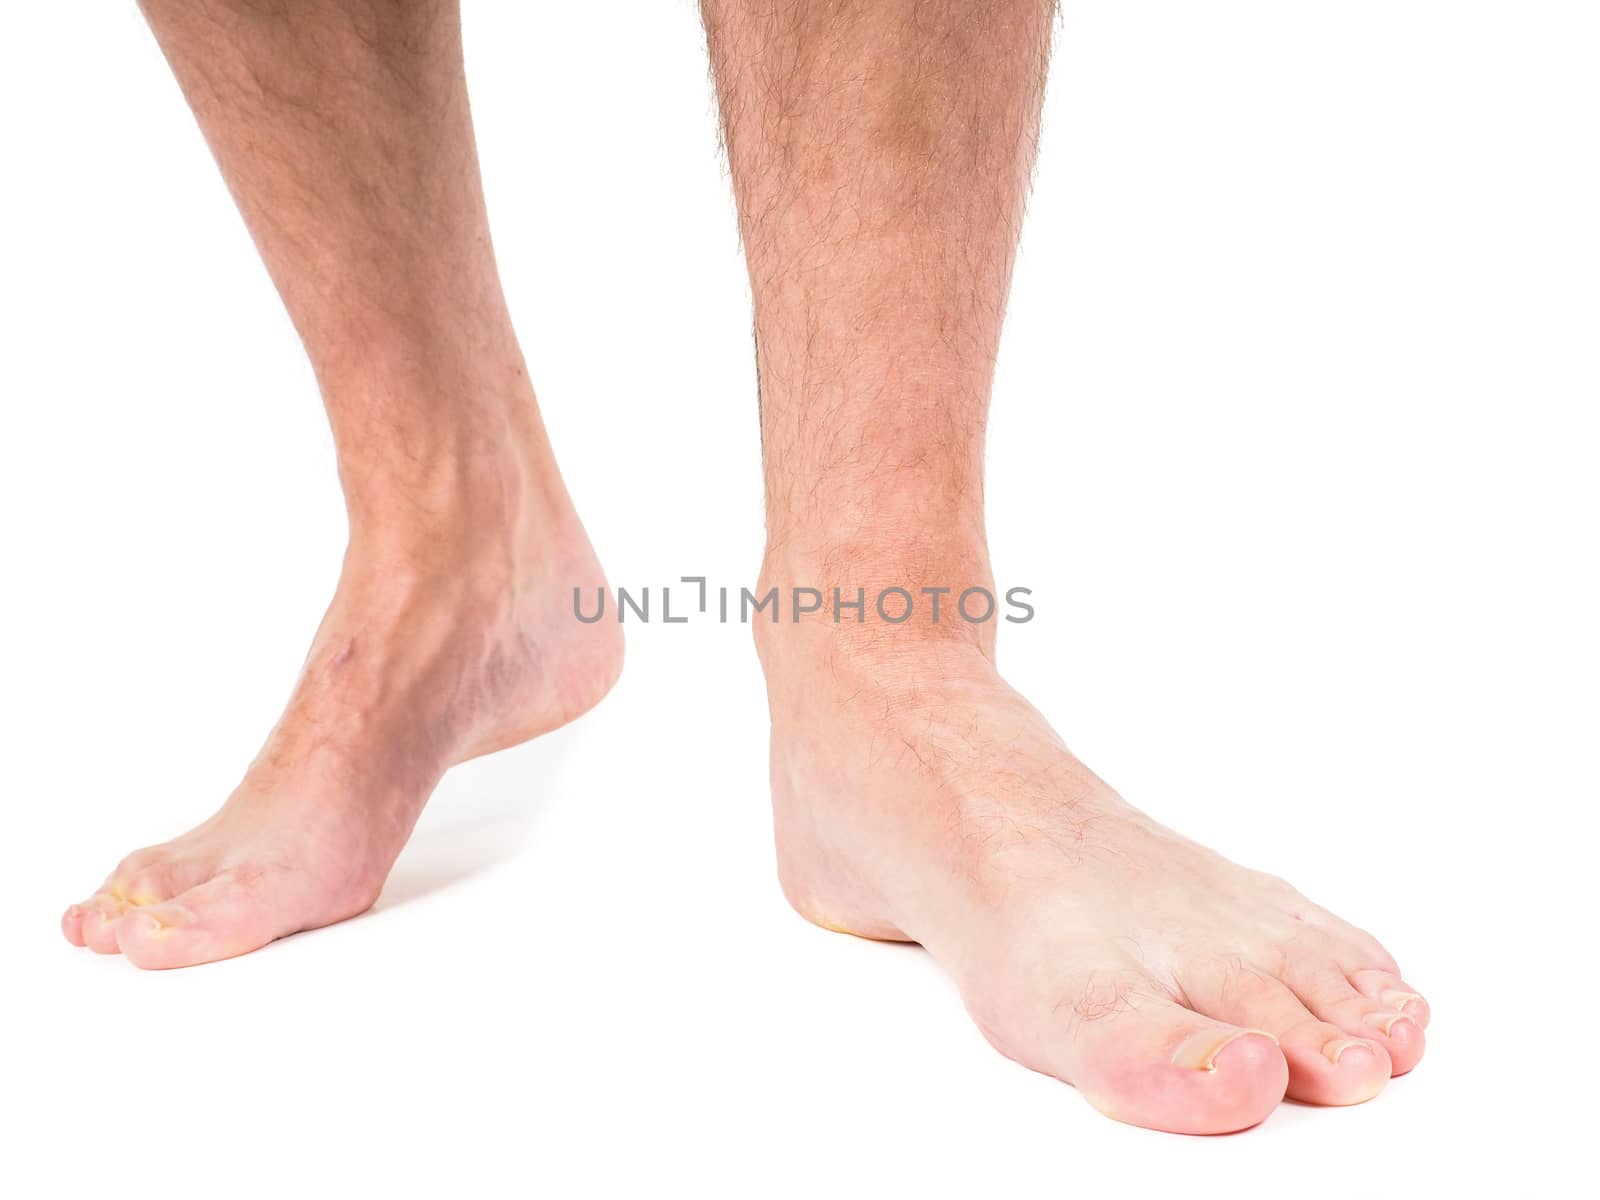 Male person with hairy legs, walking barefooted towards, against white background